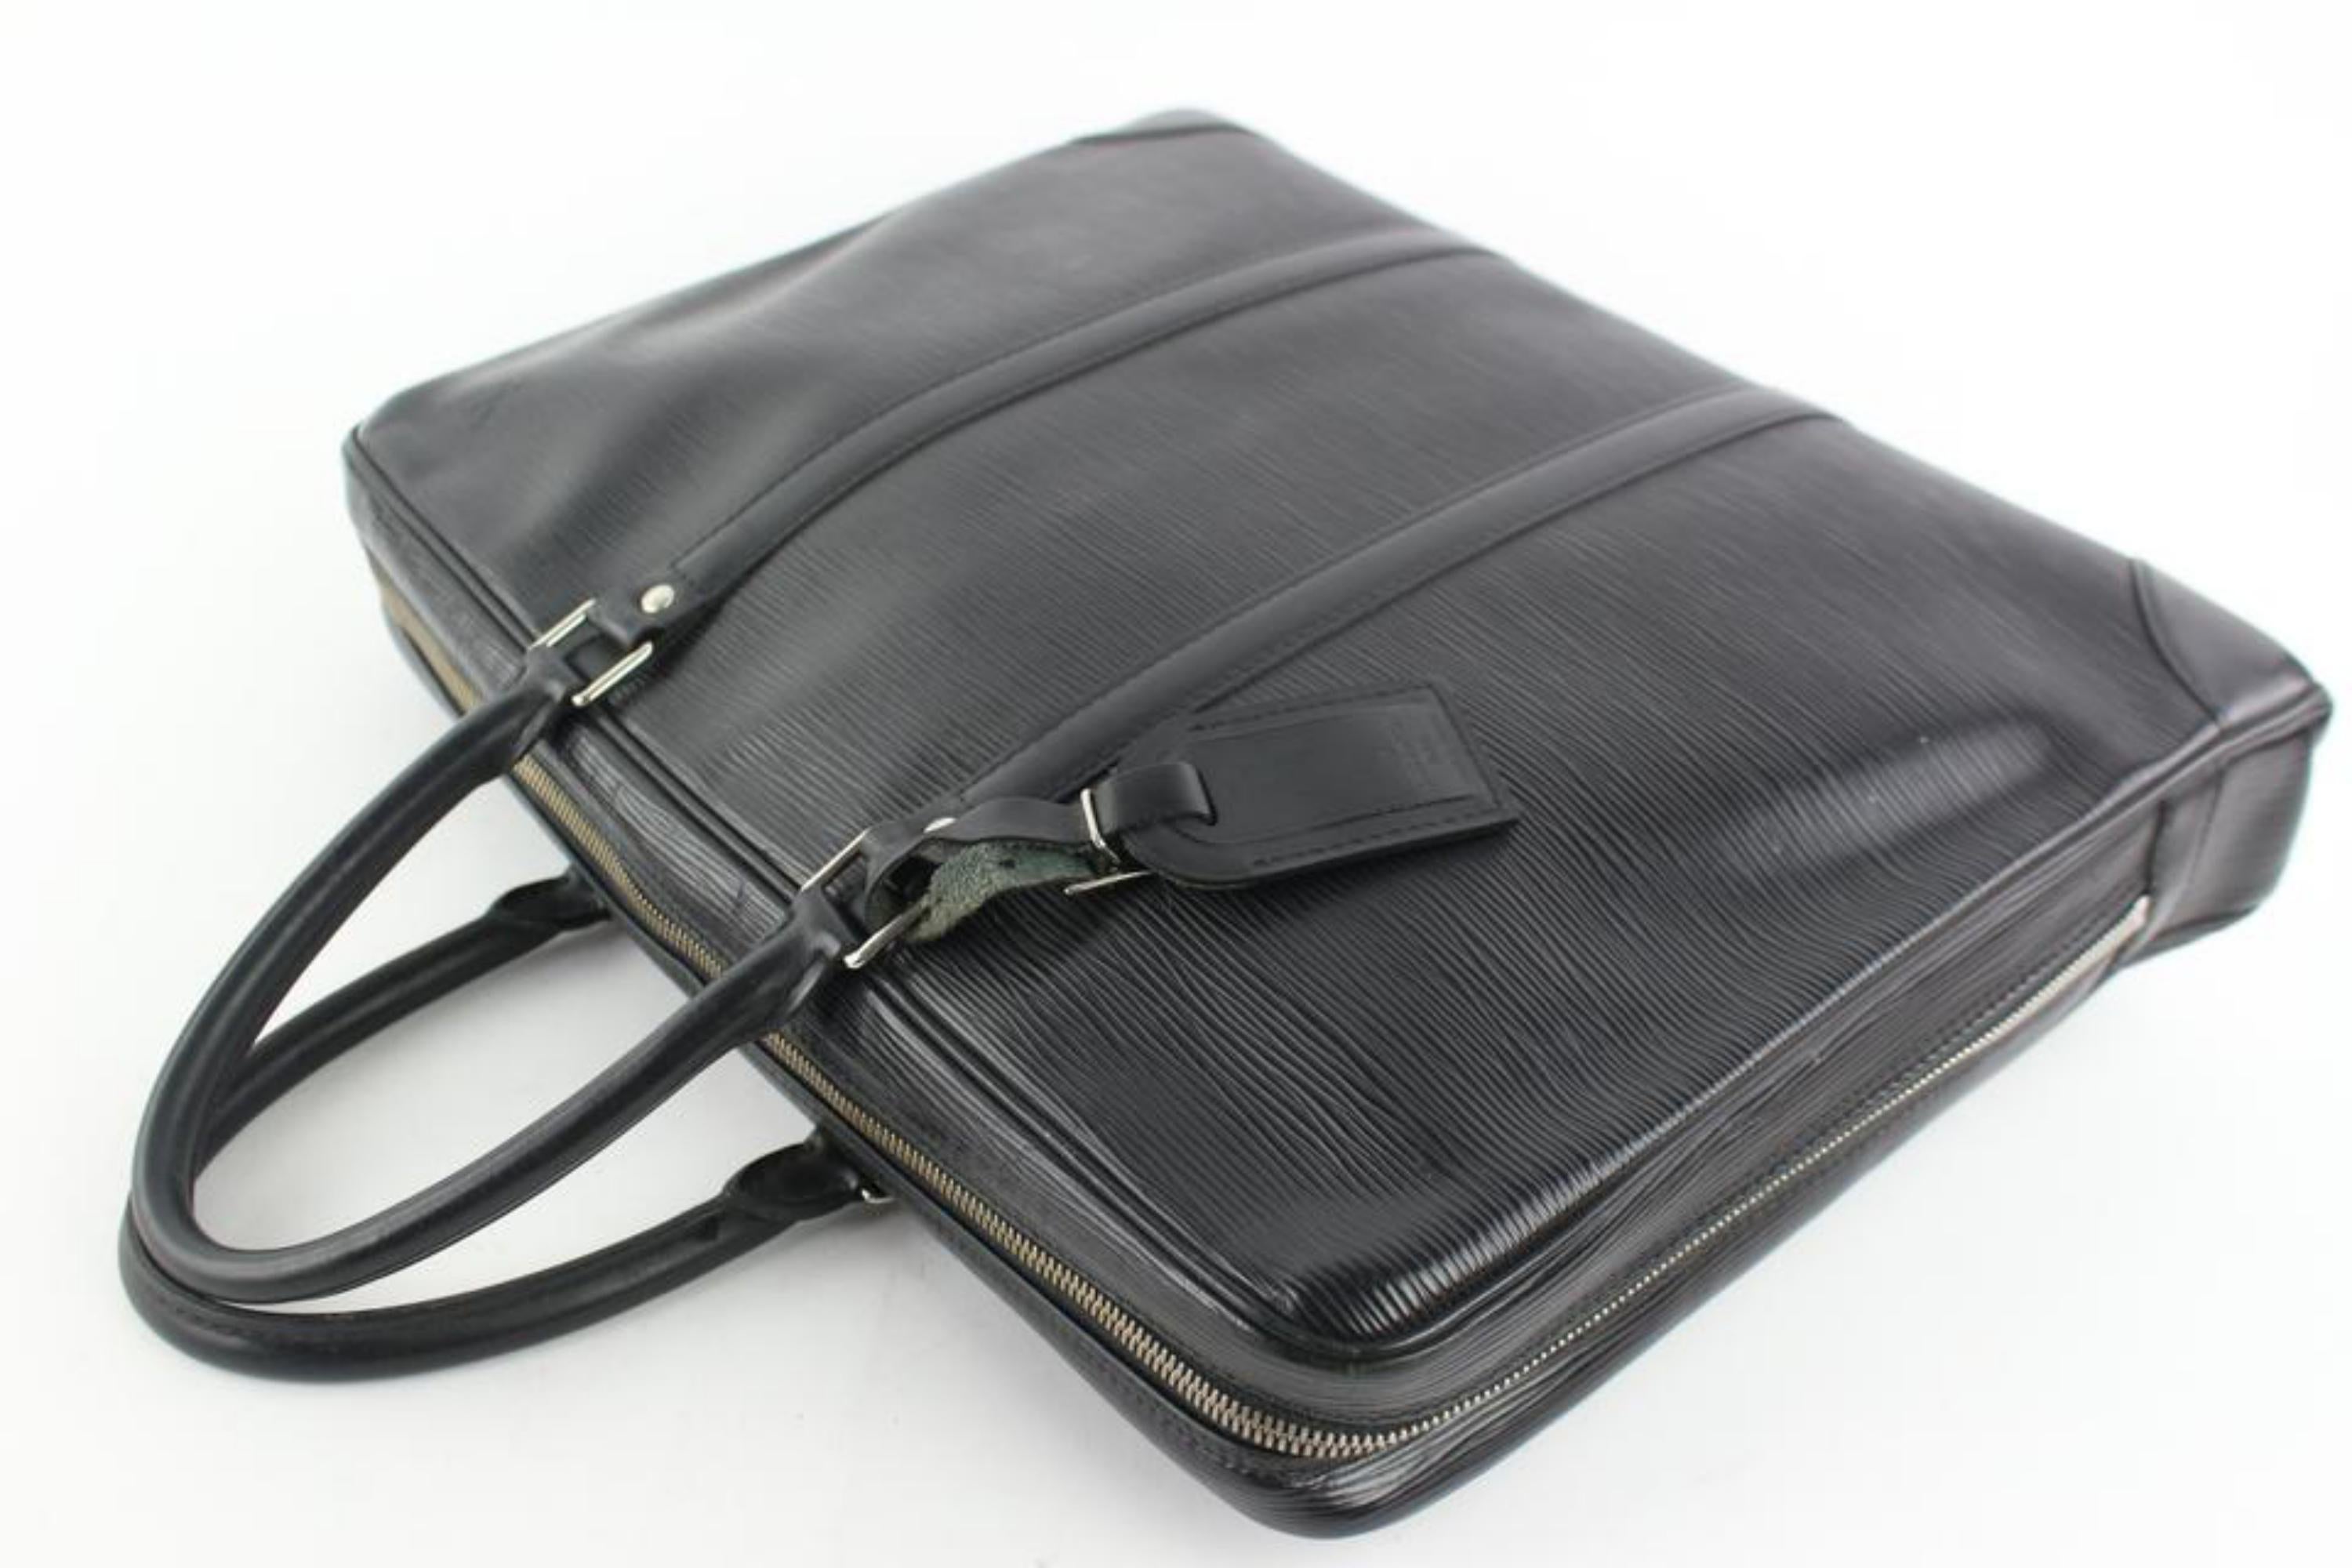 Louis Vuitton Porte-Documents Voyage Porte Noir 15lz0914 Black Leather LaptopBag In Good Condition For Sale In Forest Hills, NY